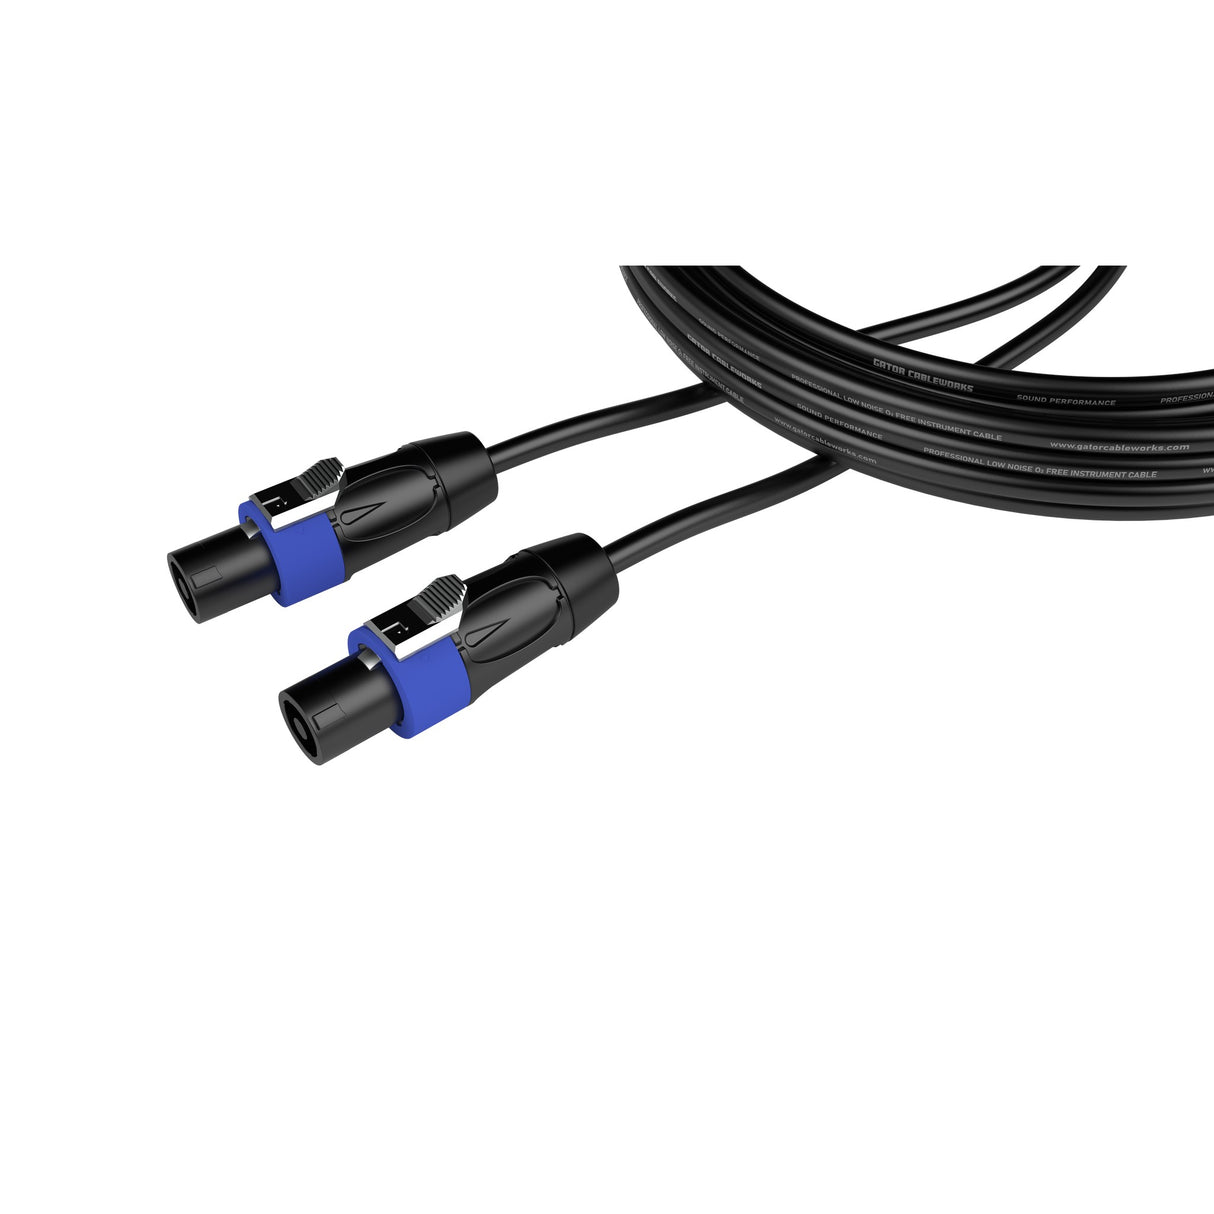 Gator CBW-CPSRSPKR2TWLK-CBLE-10 Composer Series Twist Lock Connector to Twist Lock Connector Speaker Cable, 10-Foot